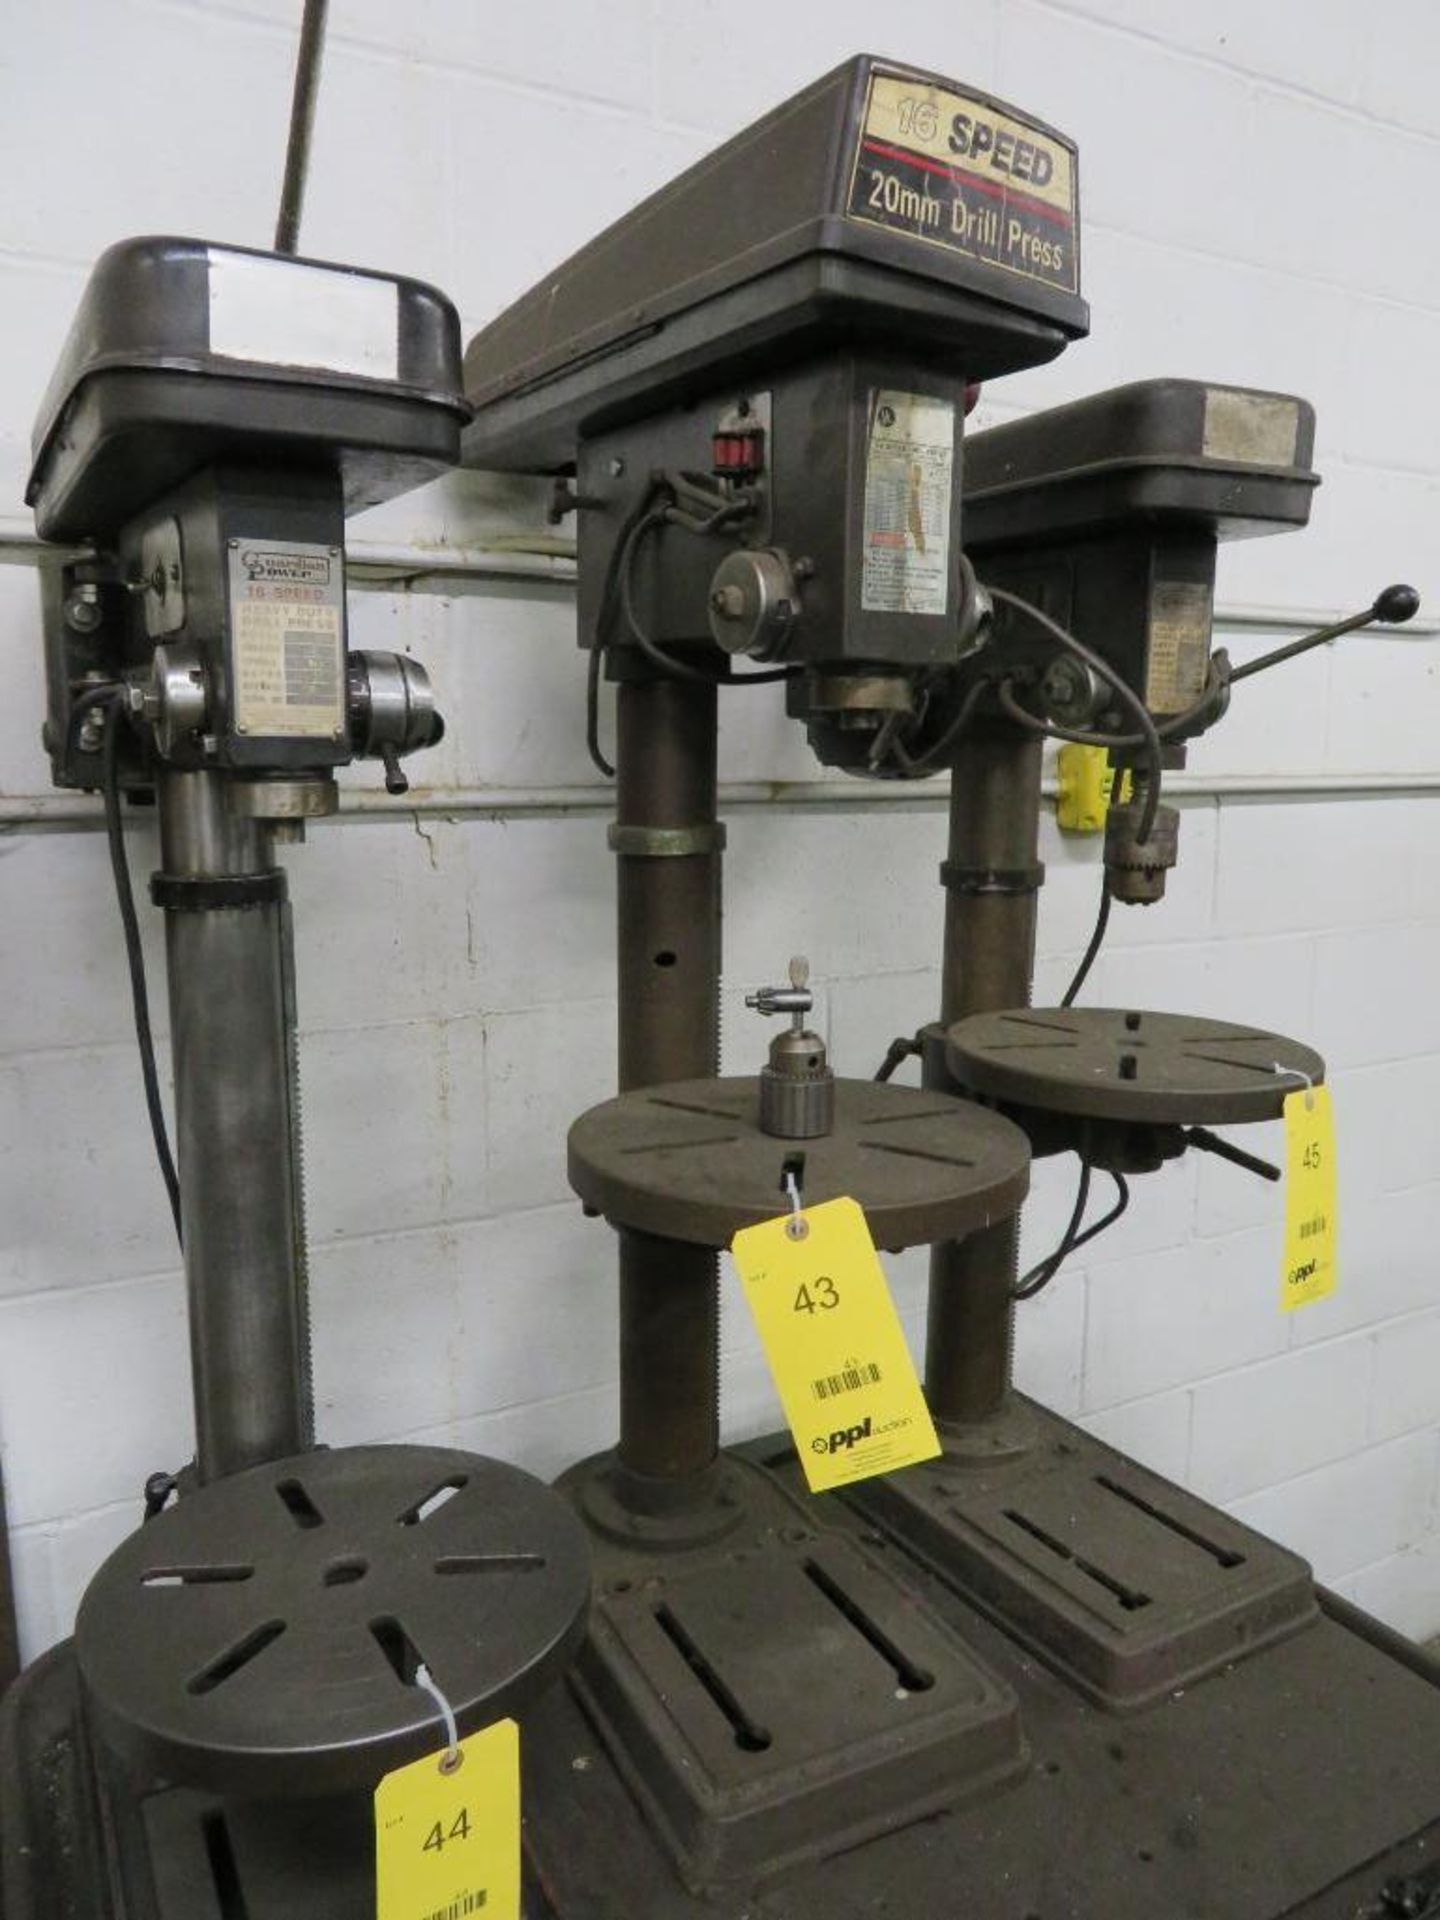 Target Machinery 17 in. Bench Drill